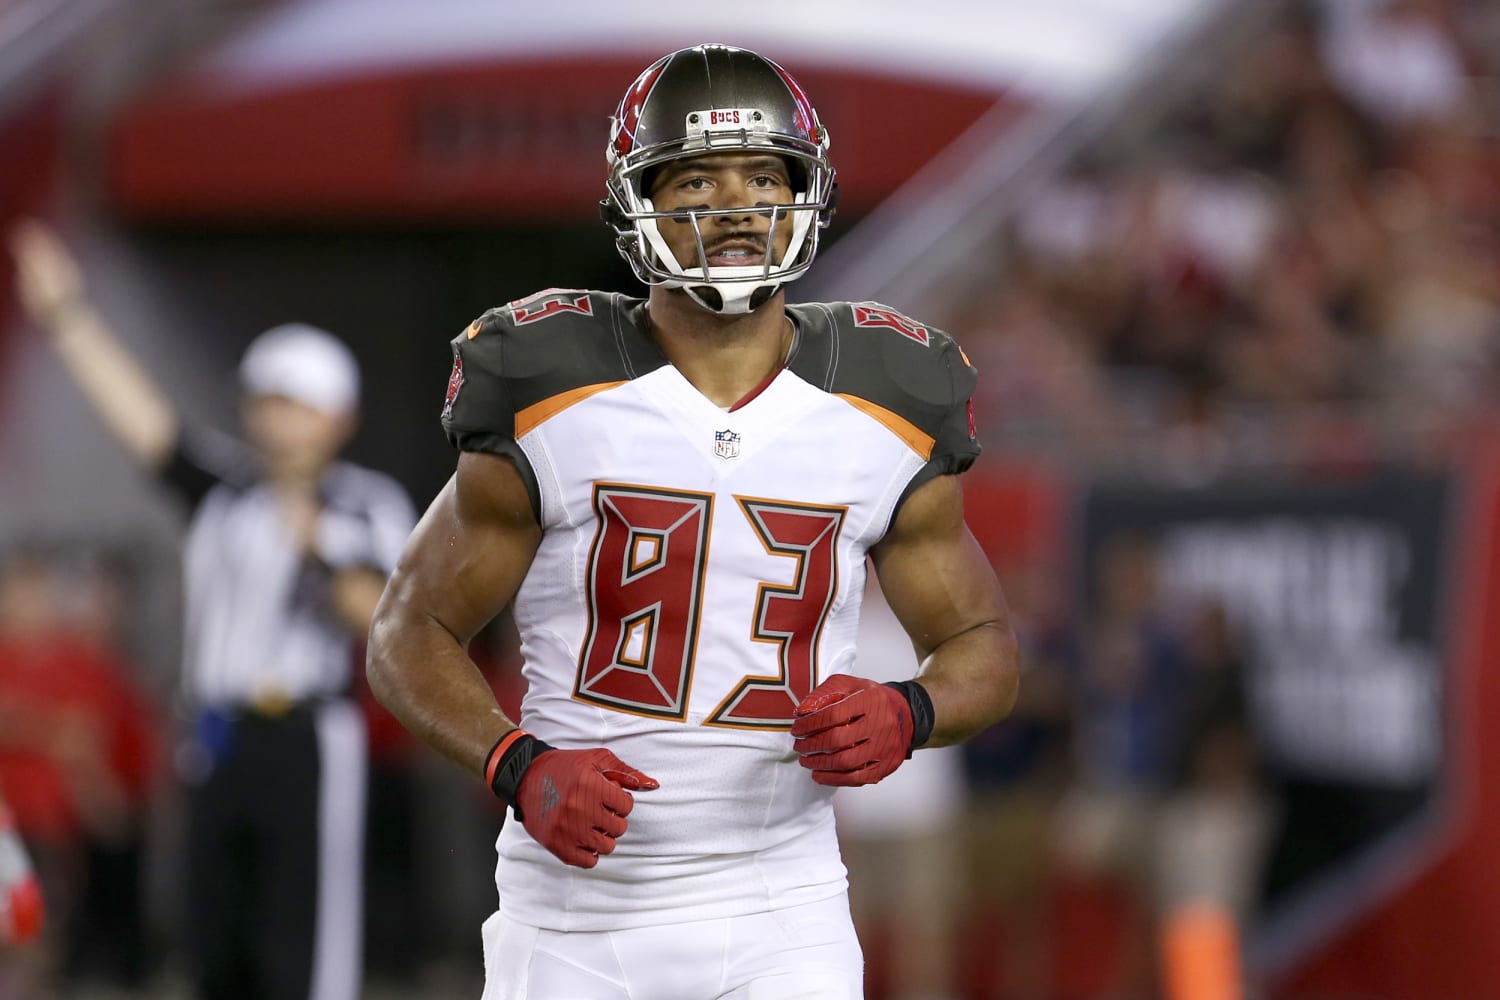 Vincent Jackson, former NFL player found dead in hotel room, had CTE, family says